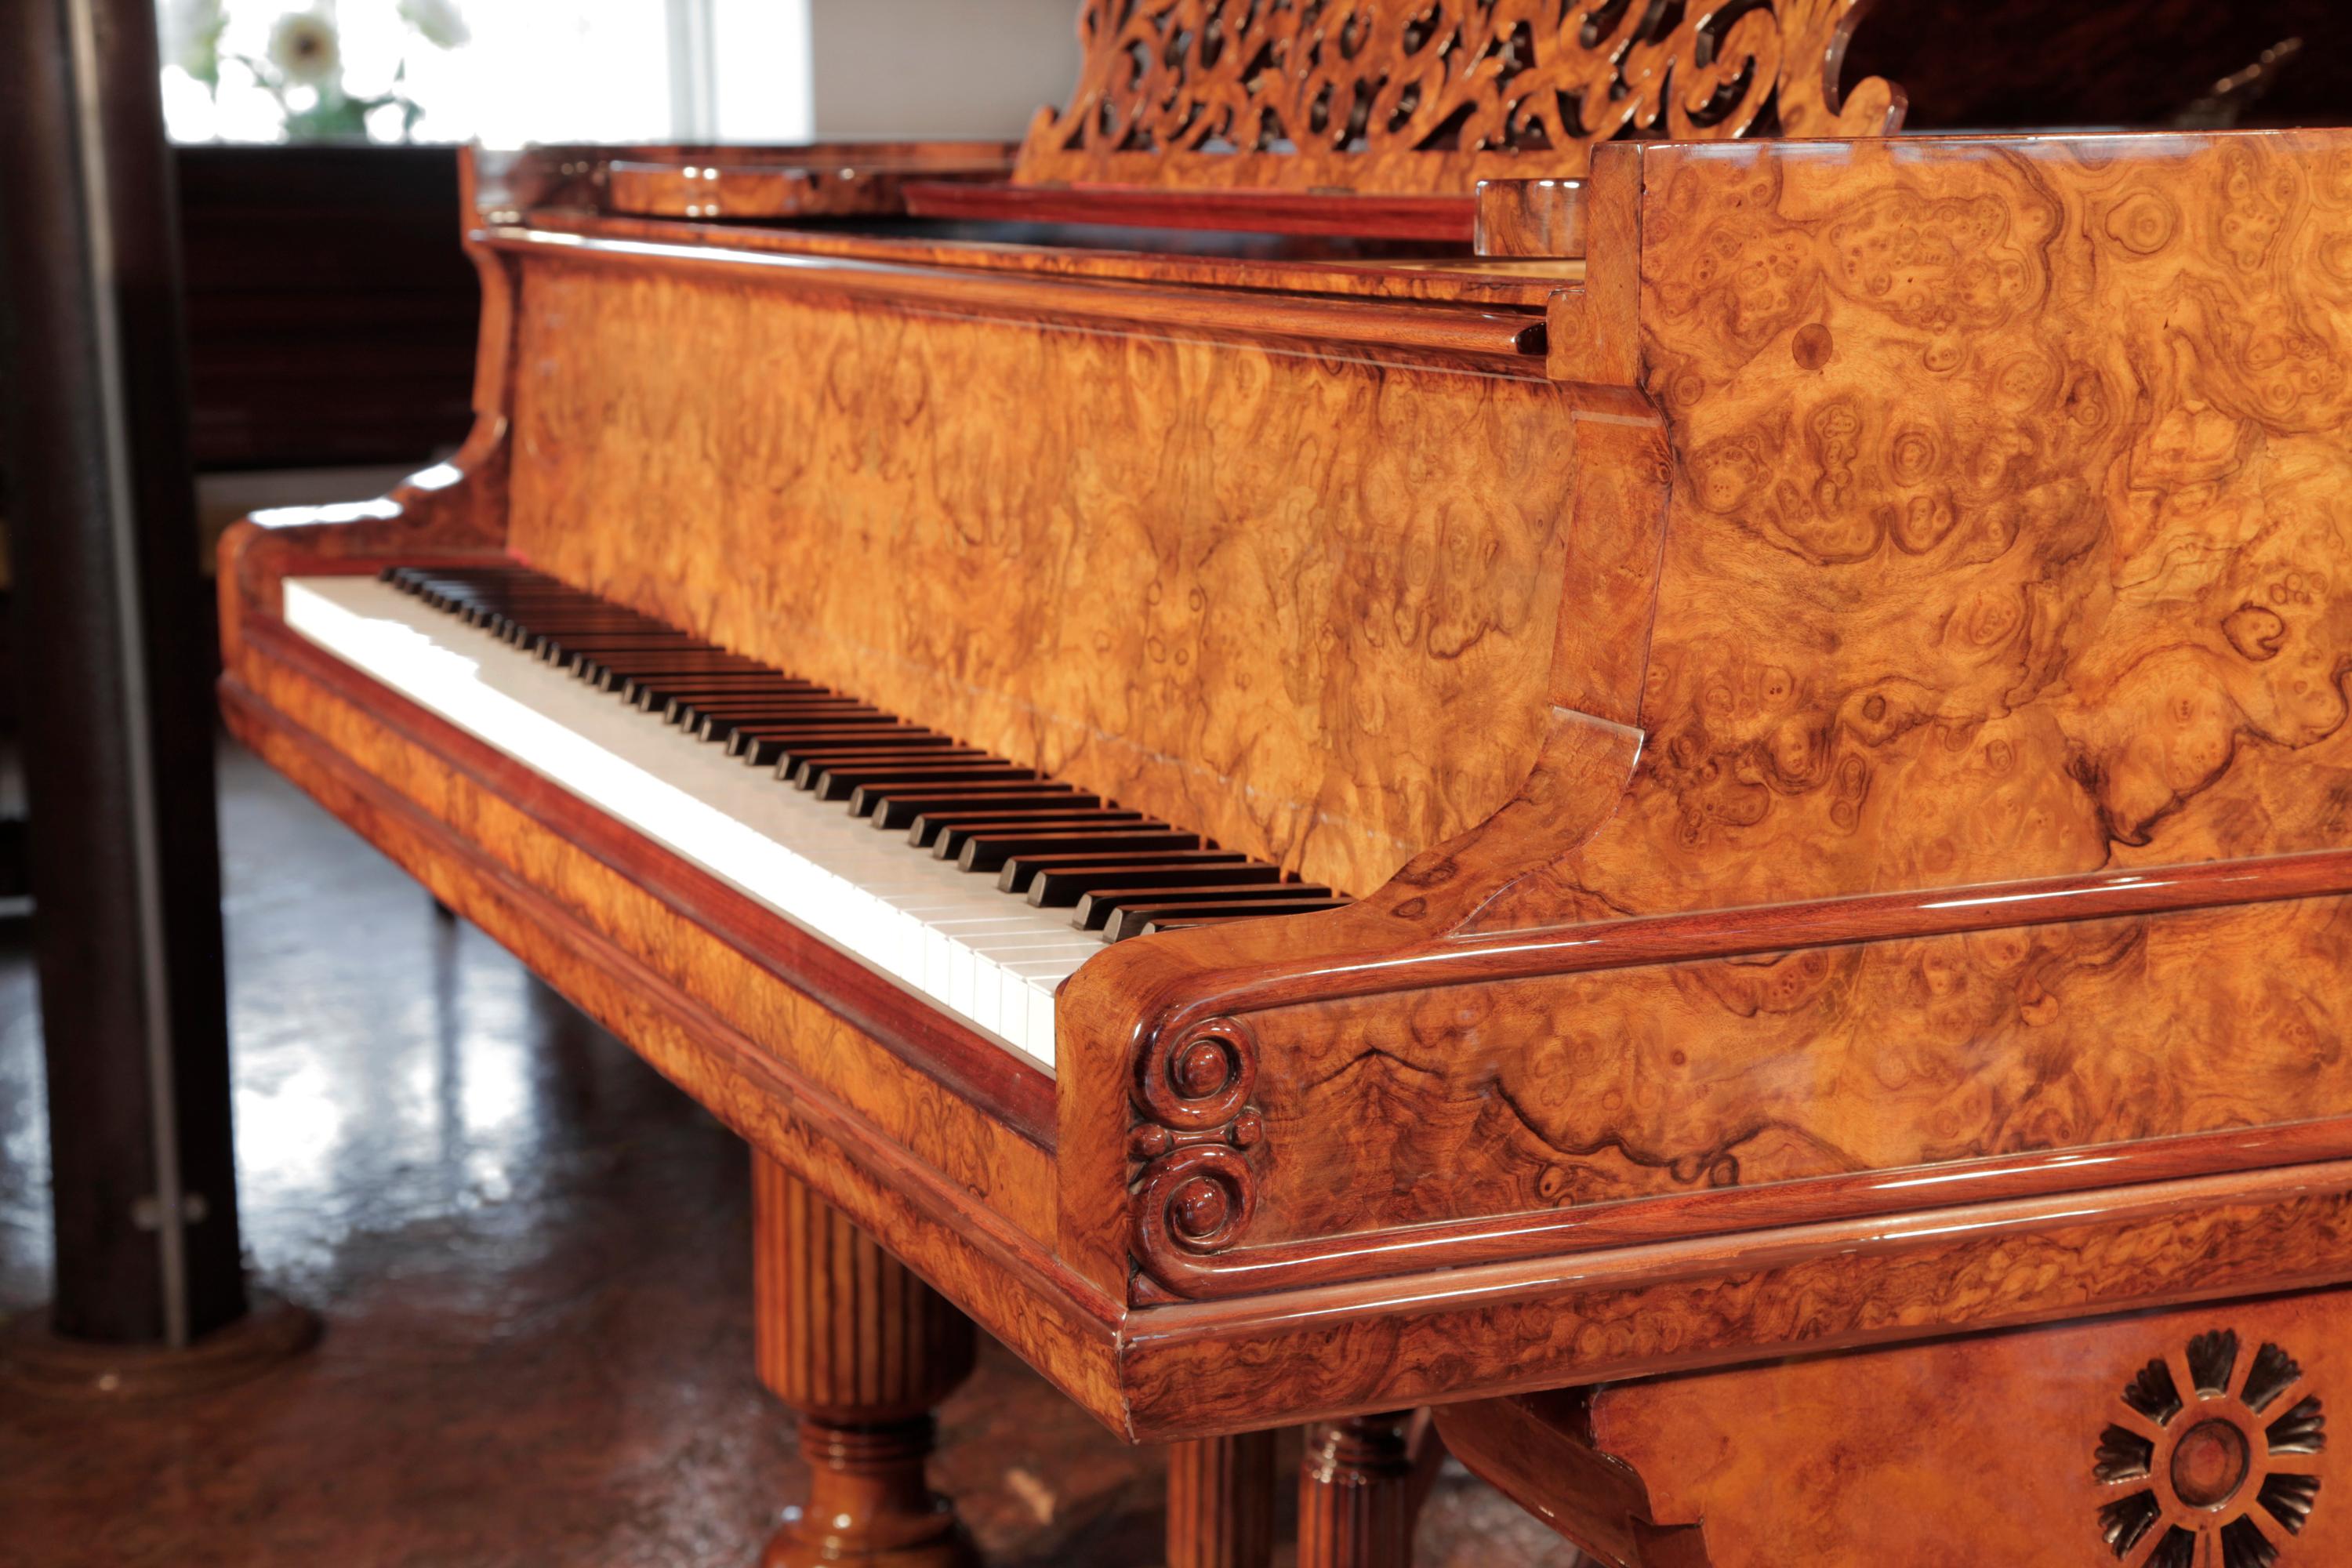 Rebuilt, 1881, Steinway & Sons Model D concert grand piano with a burr walnut case, filigree music desk and fluted, barrel legs. The music desk is an arabesque cut-out design with a central lyre motif. The piano legs are fluted, barrels with a